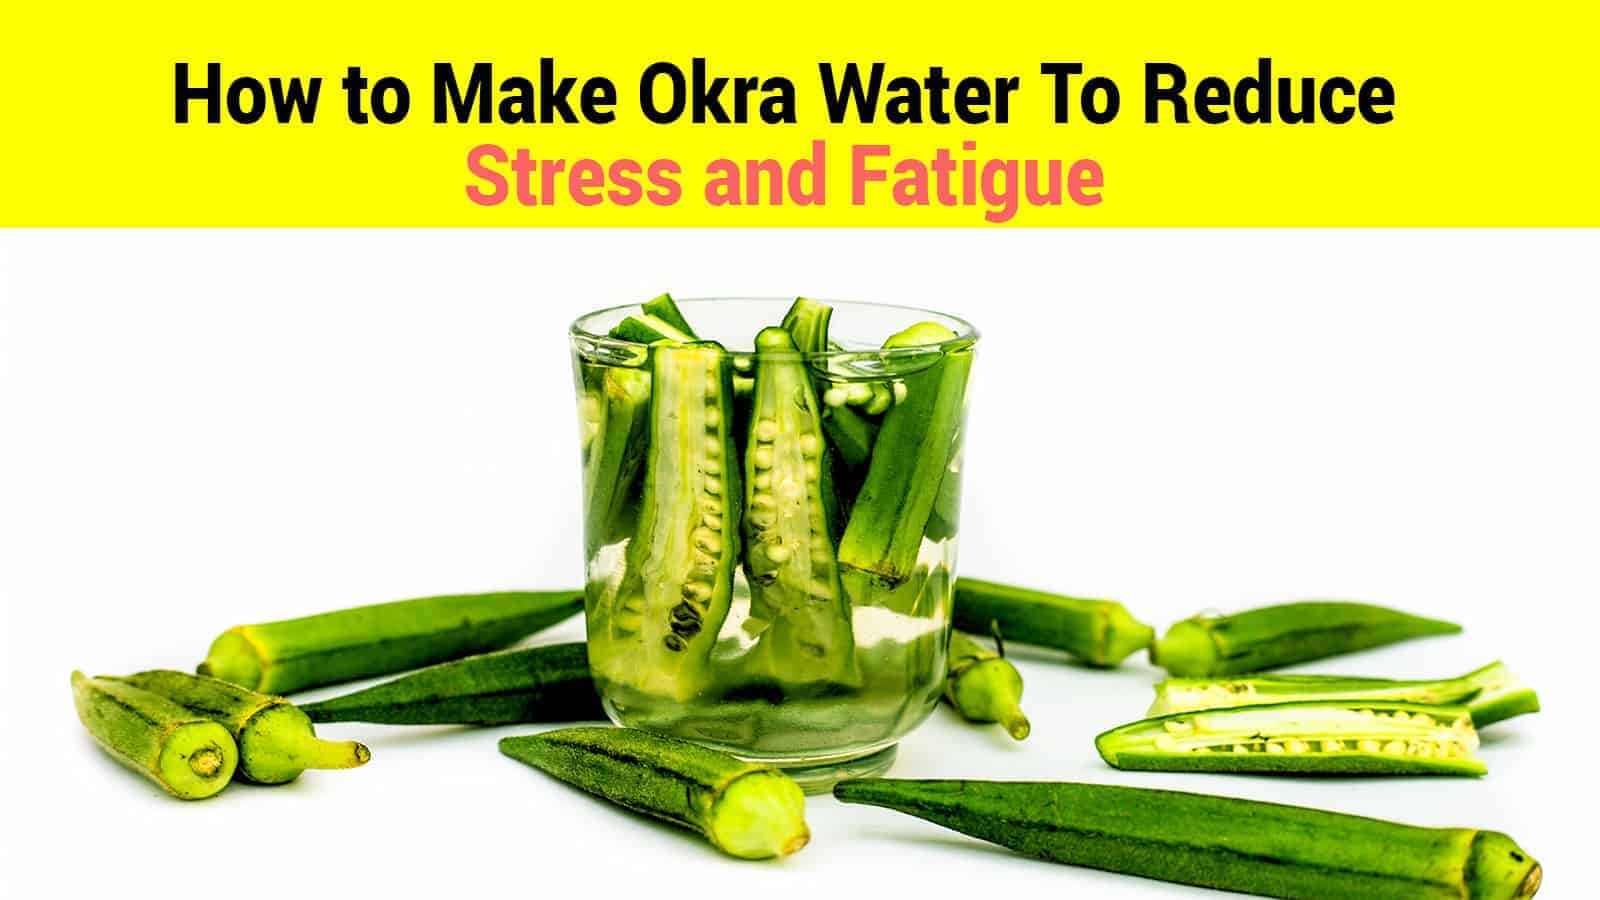 How to Make Okra Water to Reduce Stress and Fatigue